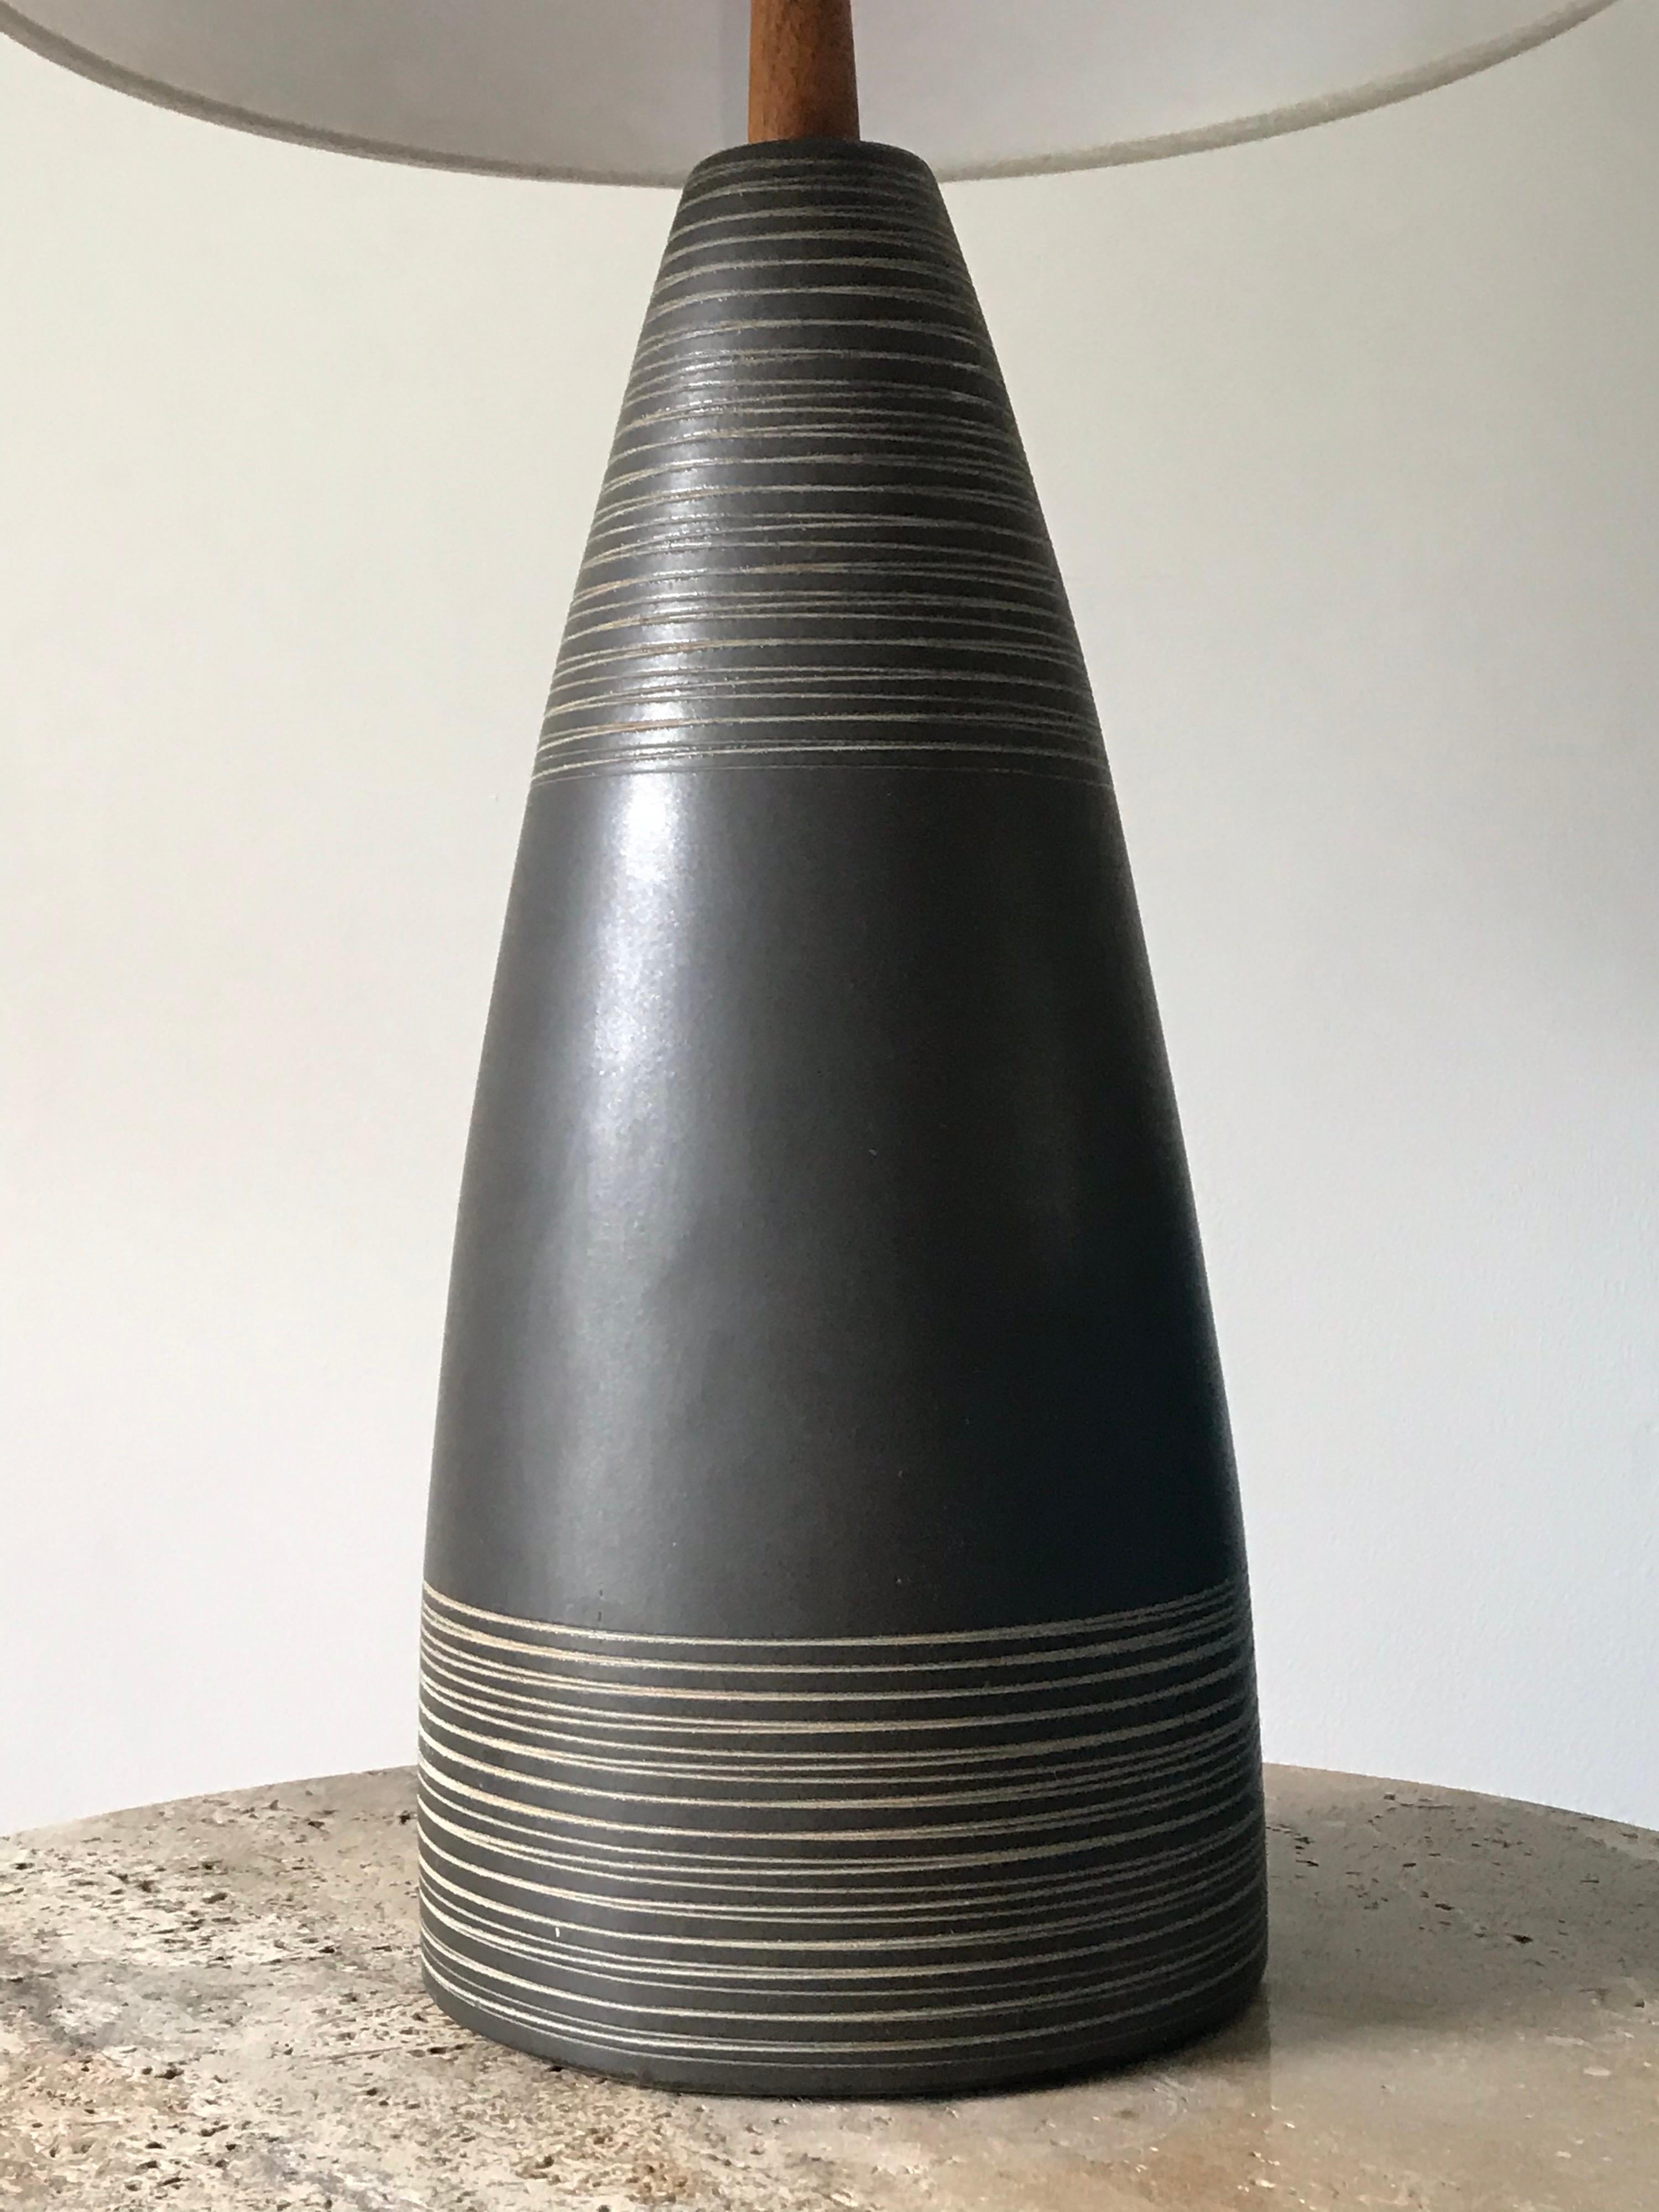 Beautiful dark grey ceramic table lamp by famed ceramicists duo Jane and Gordon Martz for Marshall Studious. Incised detail around the top and bottom with a matte finish. Finial has been replaced, newer wiring, and new shade. 

Measures: Ceramic